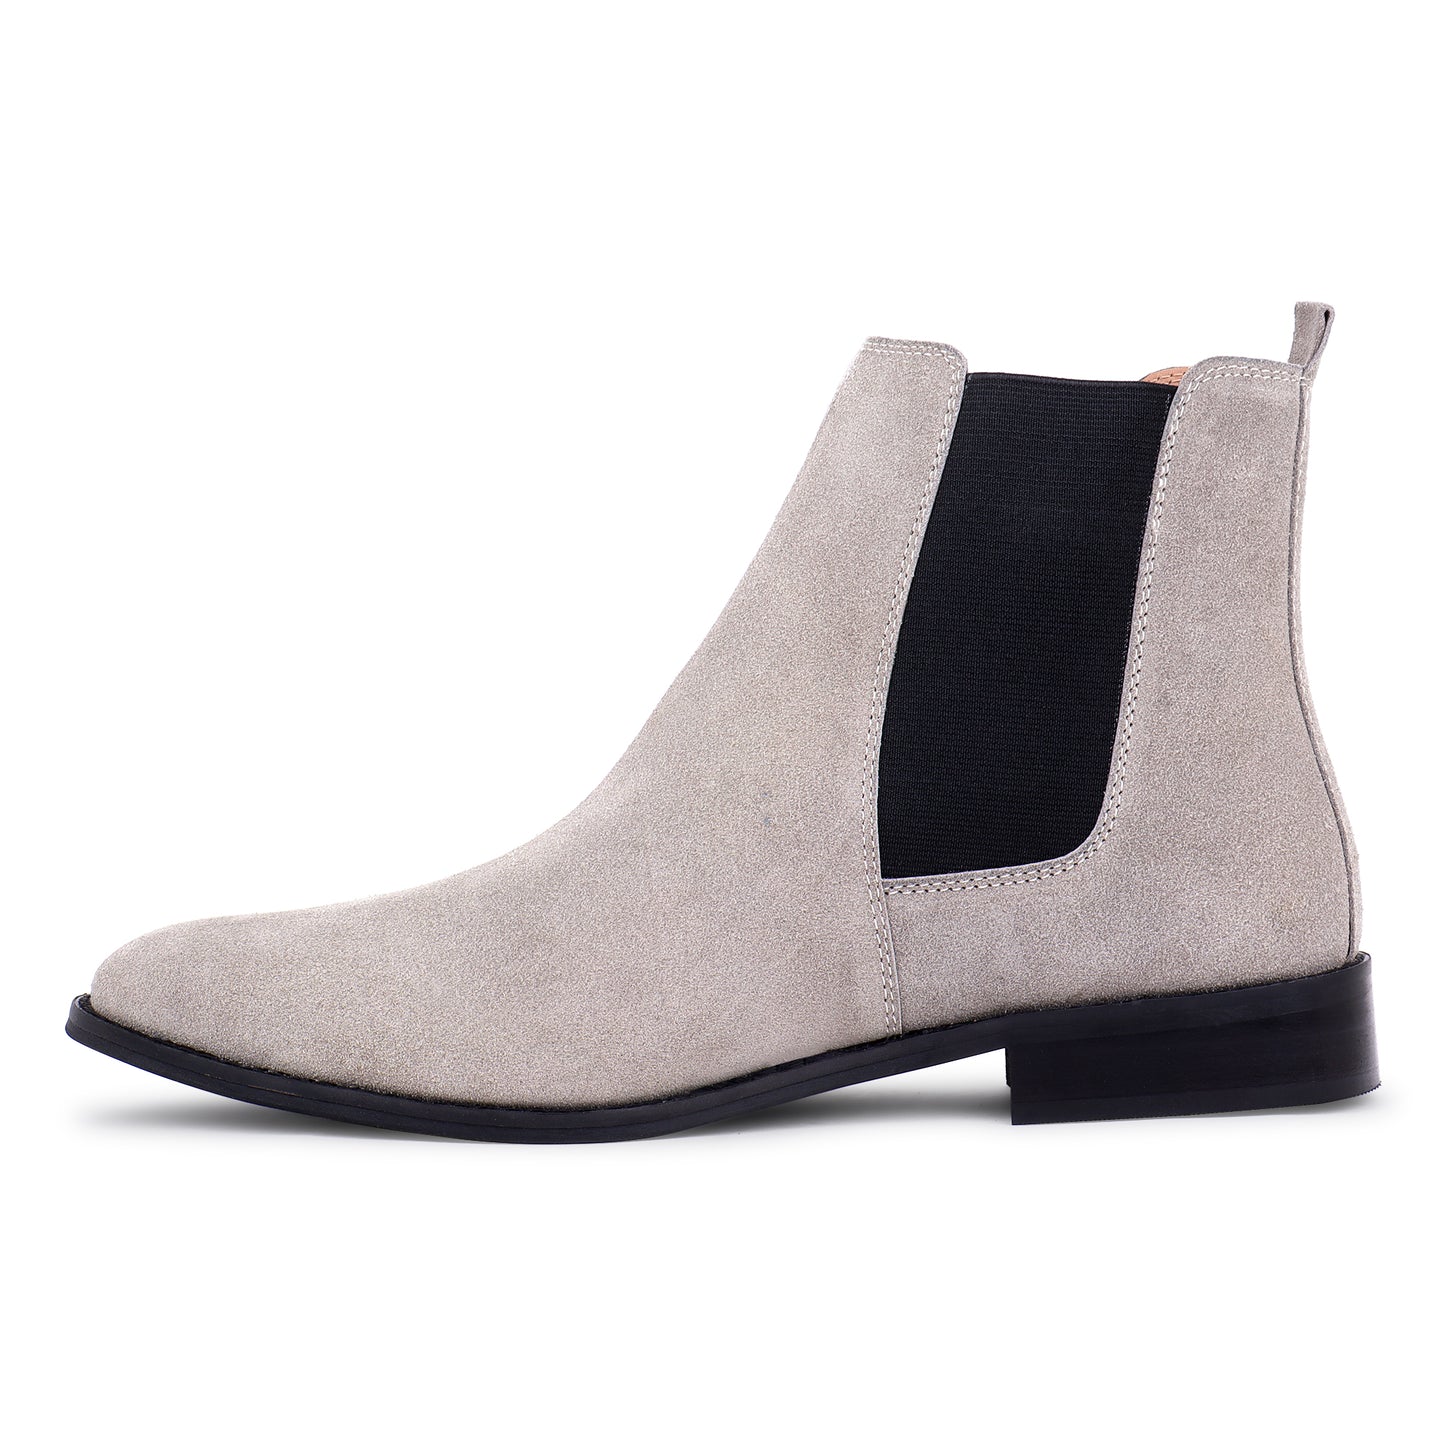 Italian Suede Leather Boots - Grey